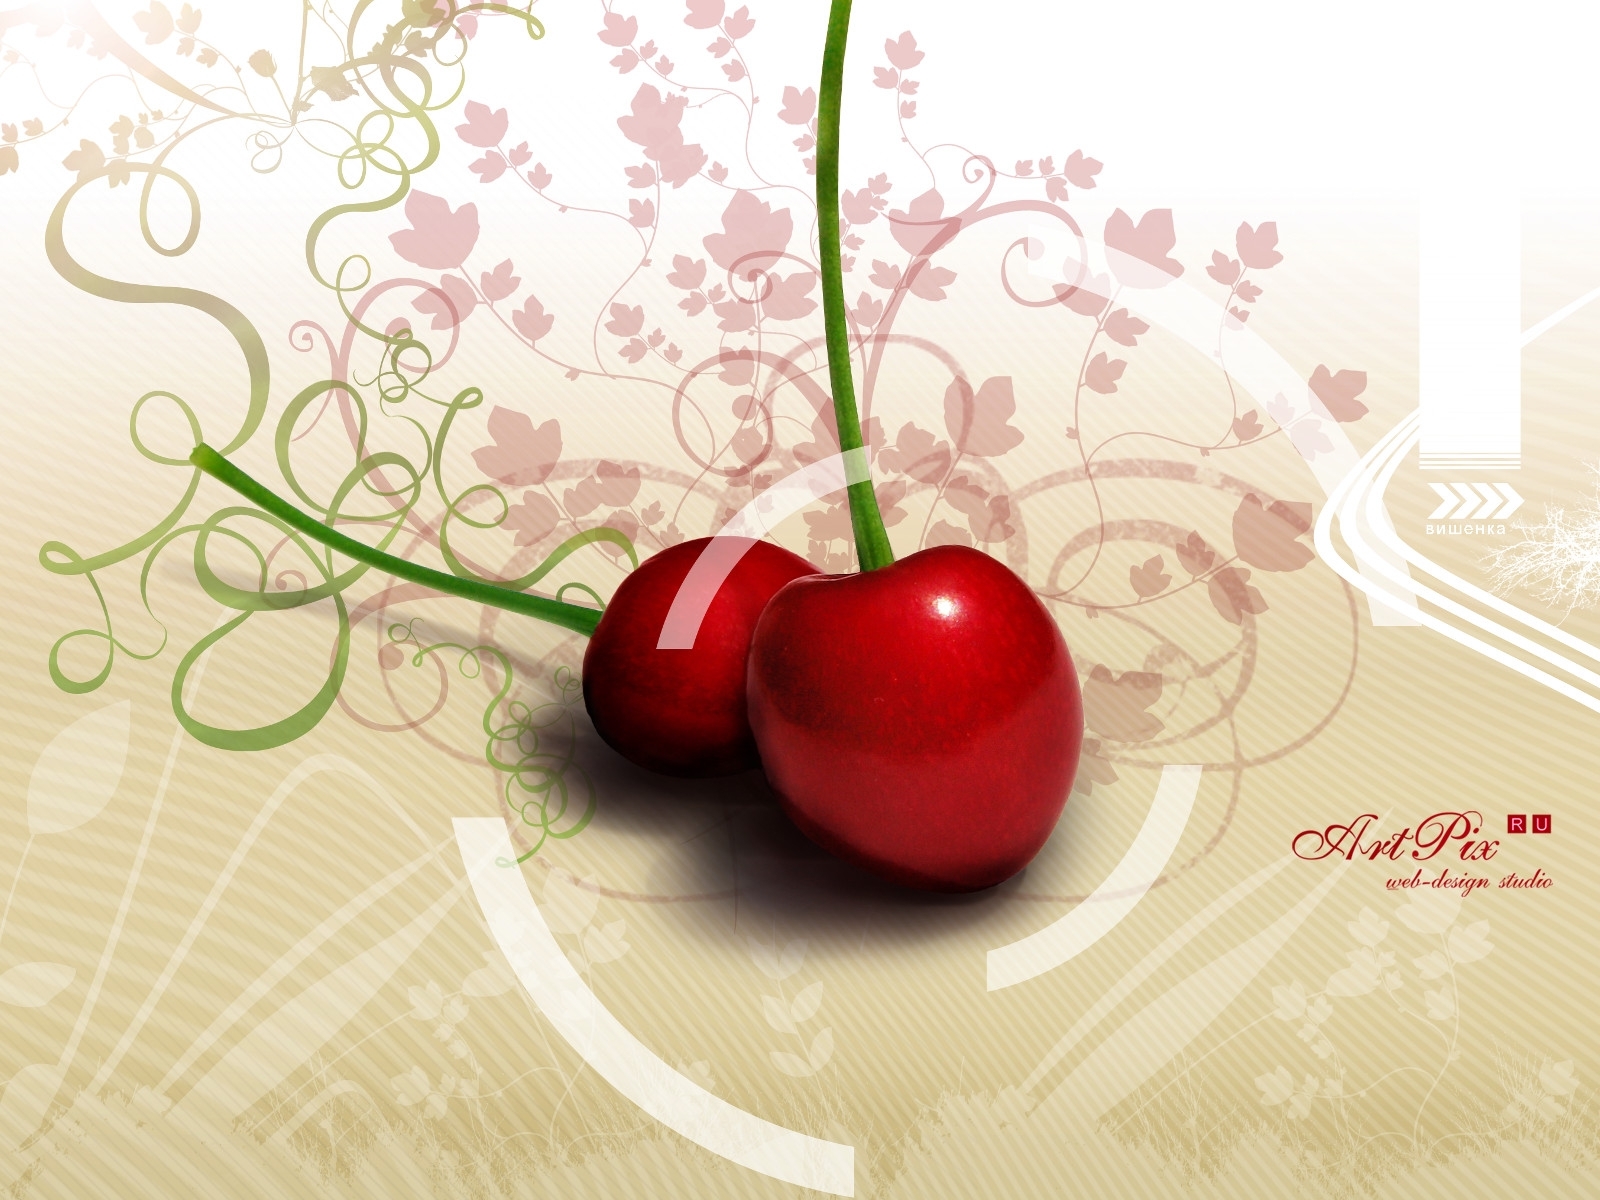 android art, fruits, sweet cherry, food, berries